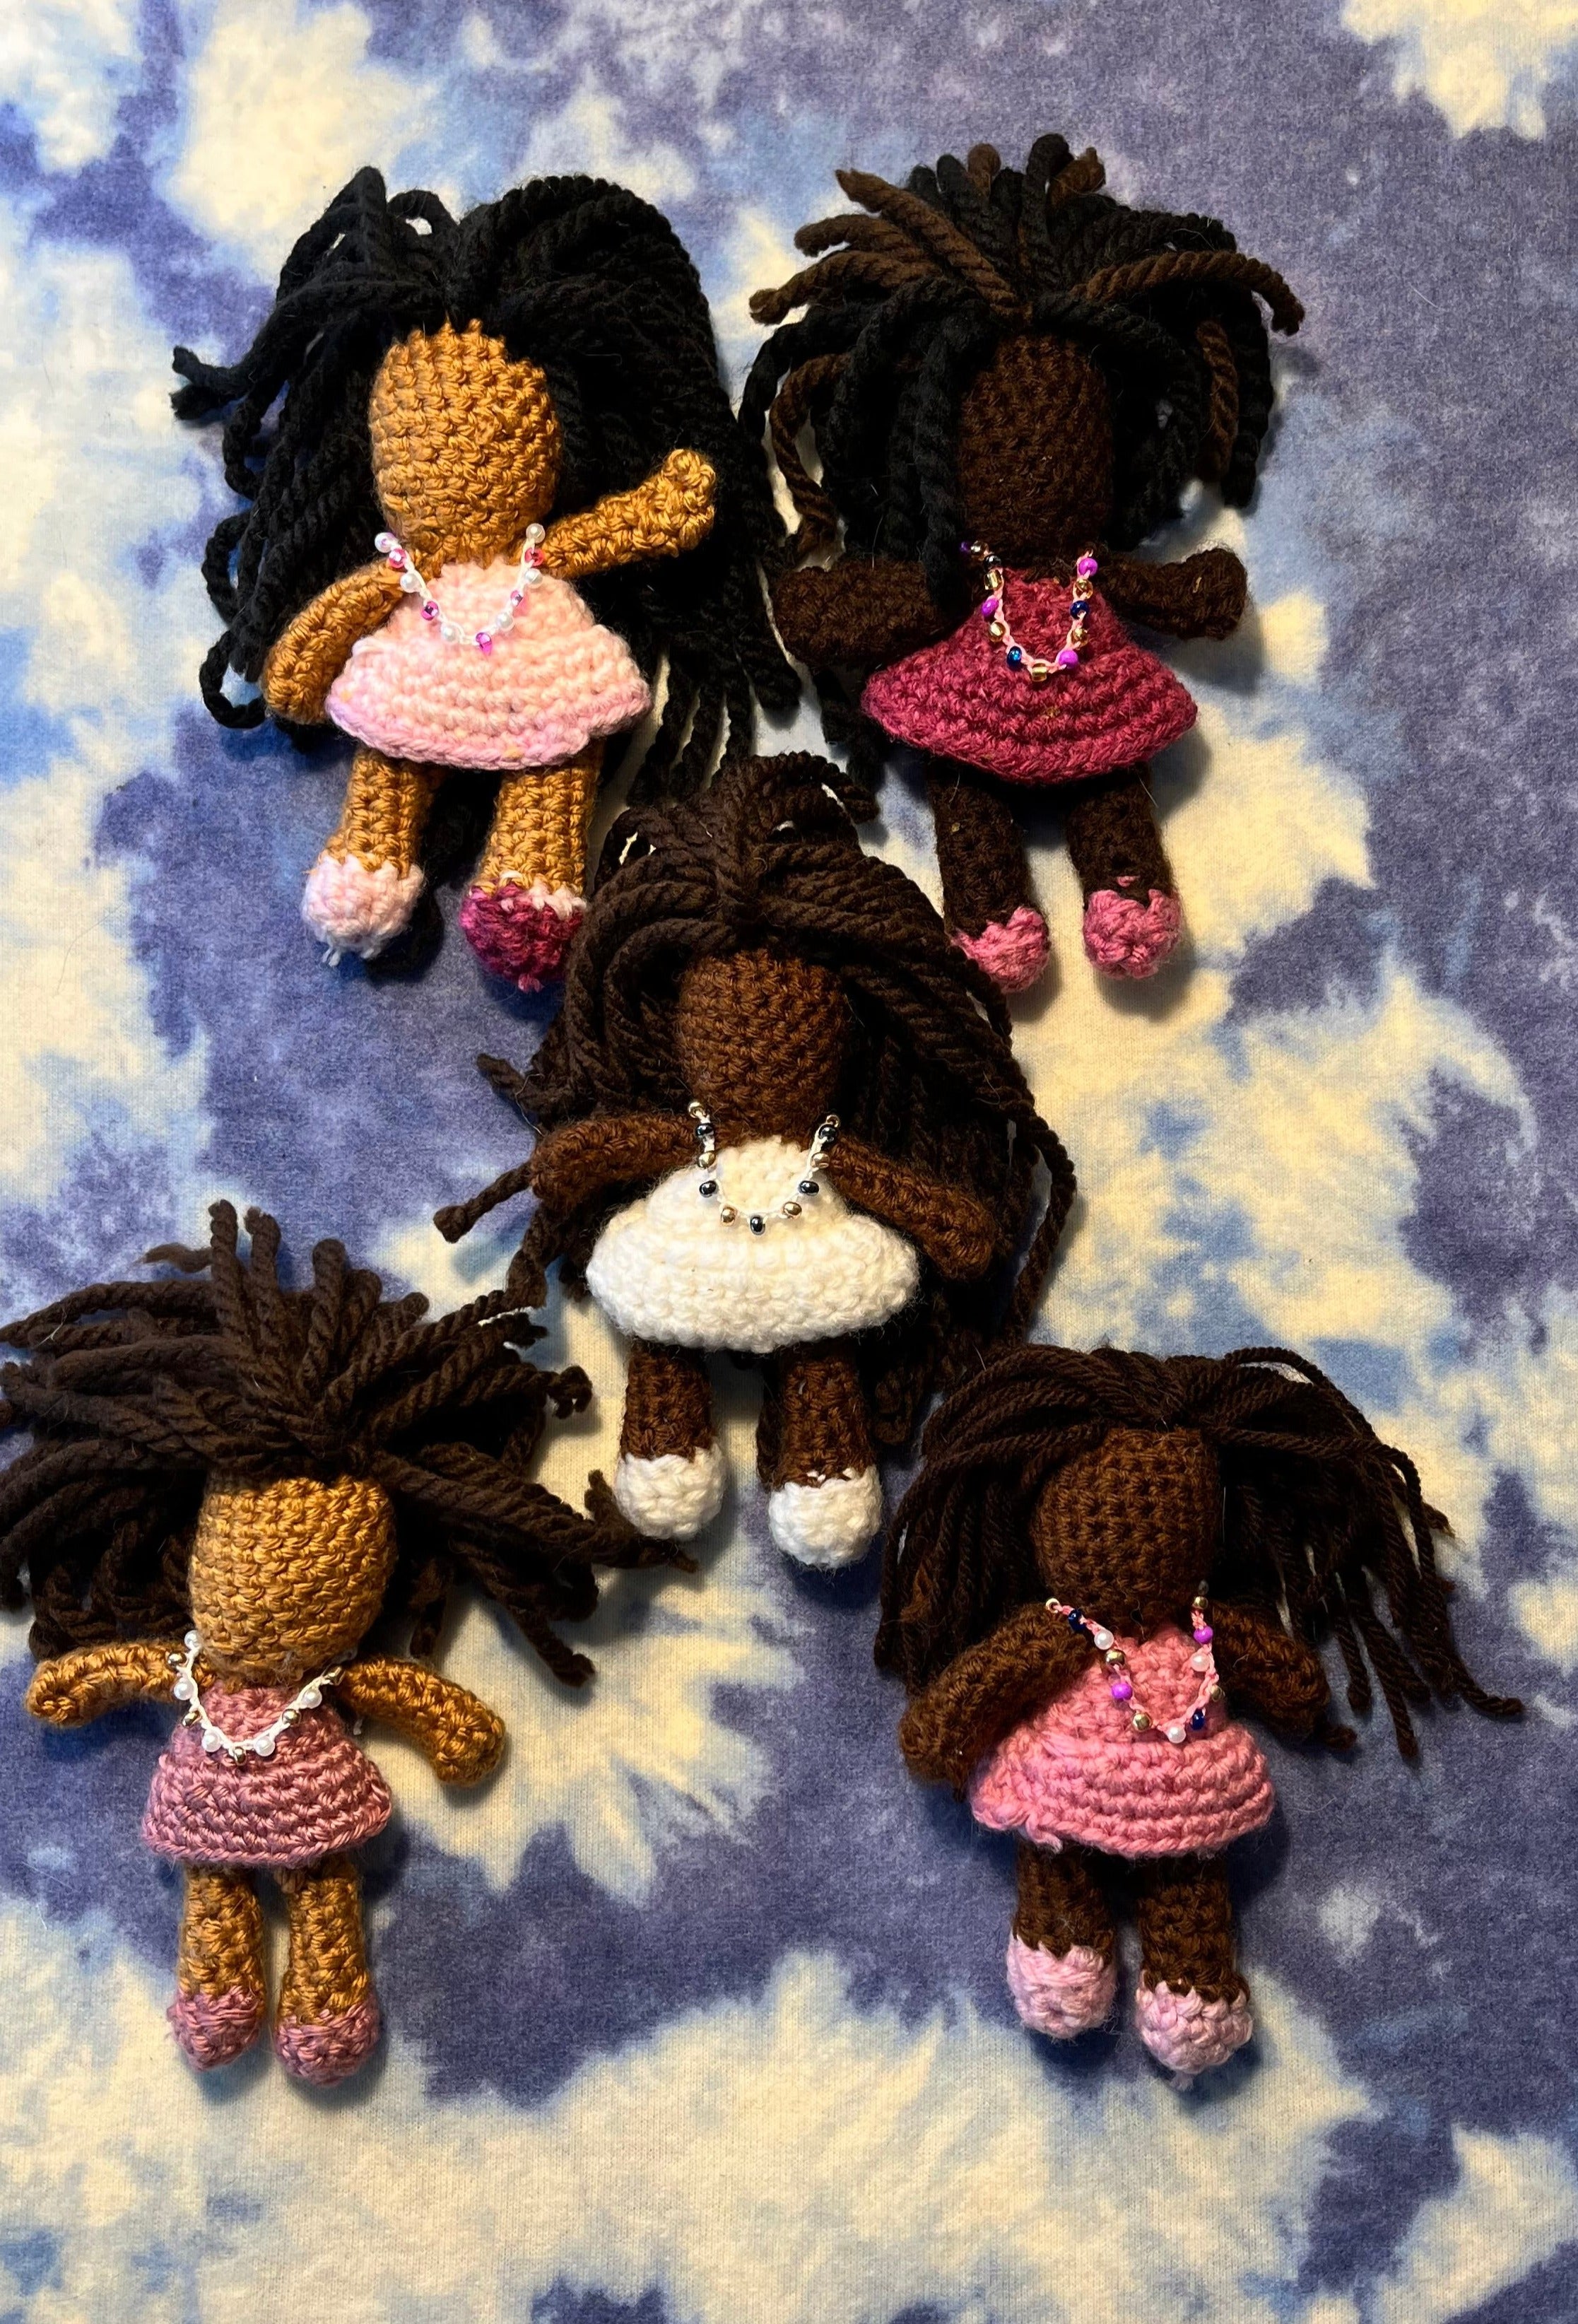 These.small crochet dolls have hand-tied black or brown yarn hair. They are wearing pink, mauve, or white dresses with matching shoes. 